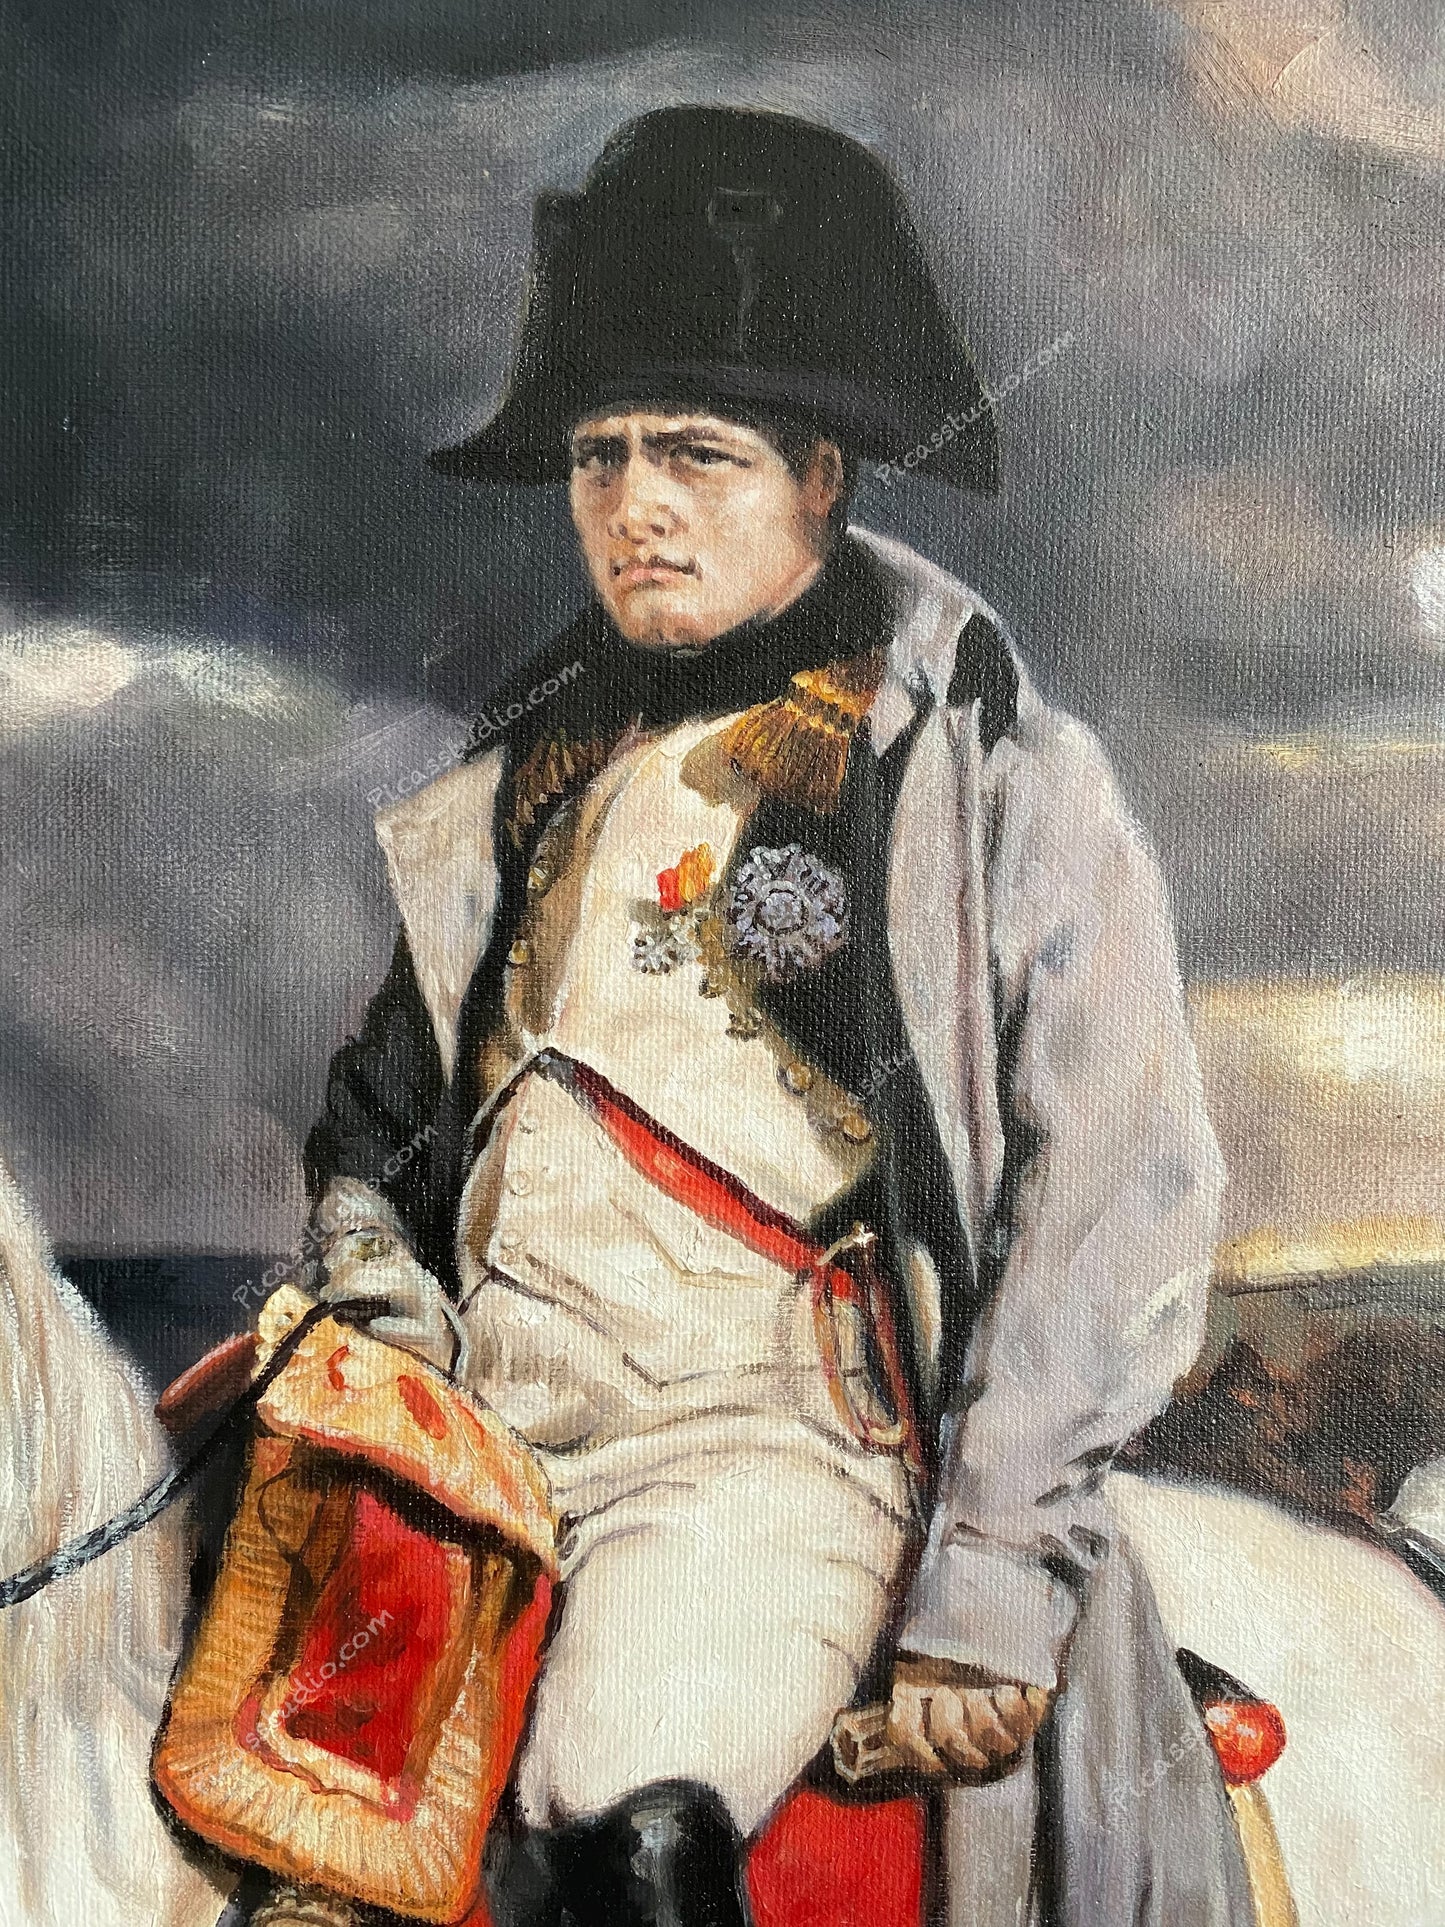 Napoleon I in 1814 by Jean-Louis-Ernest Meissonier Oil Painting Old Master Art Hand Painted on Canvas Vintage Wall Decor Unframed